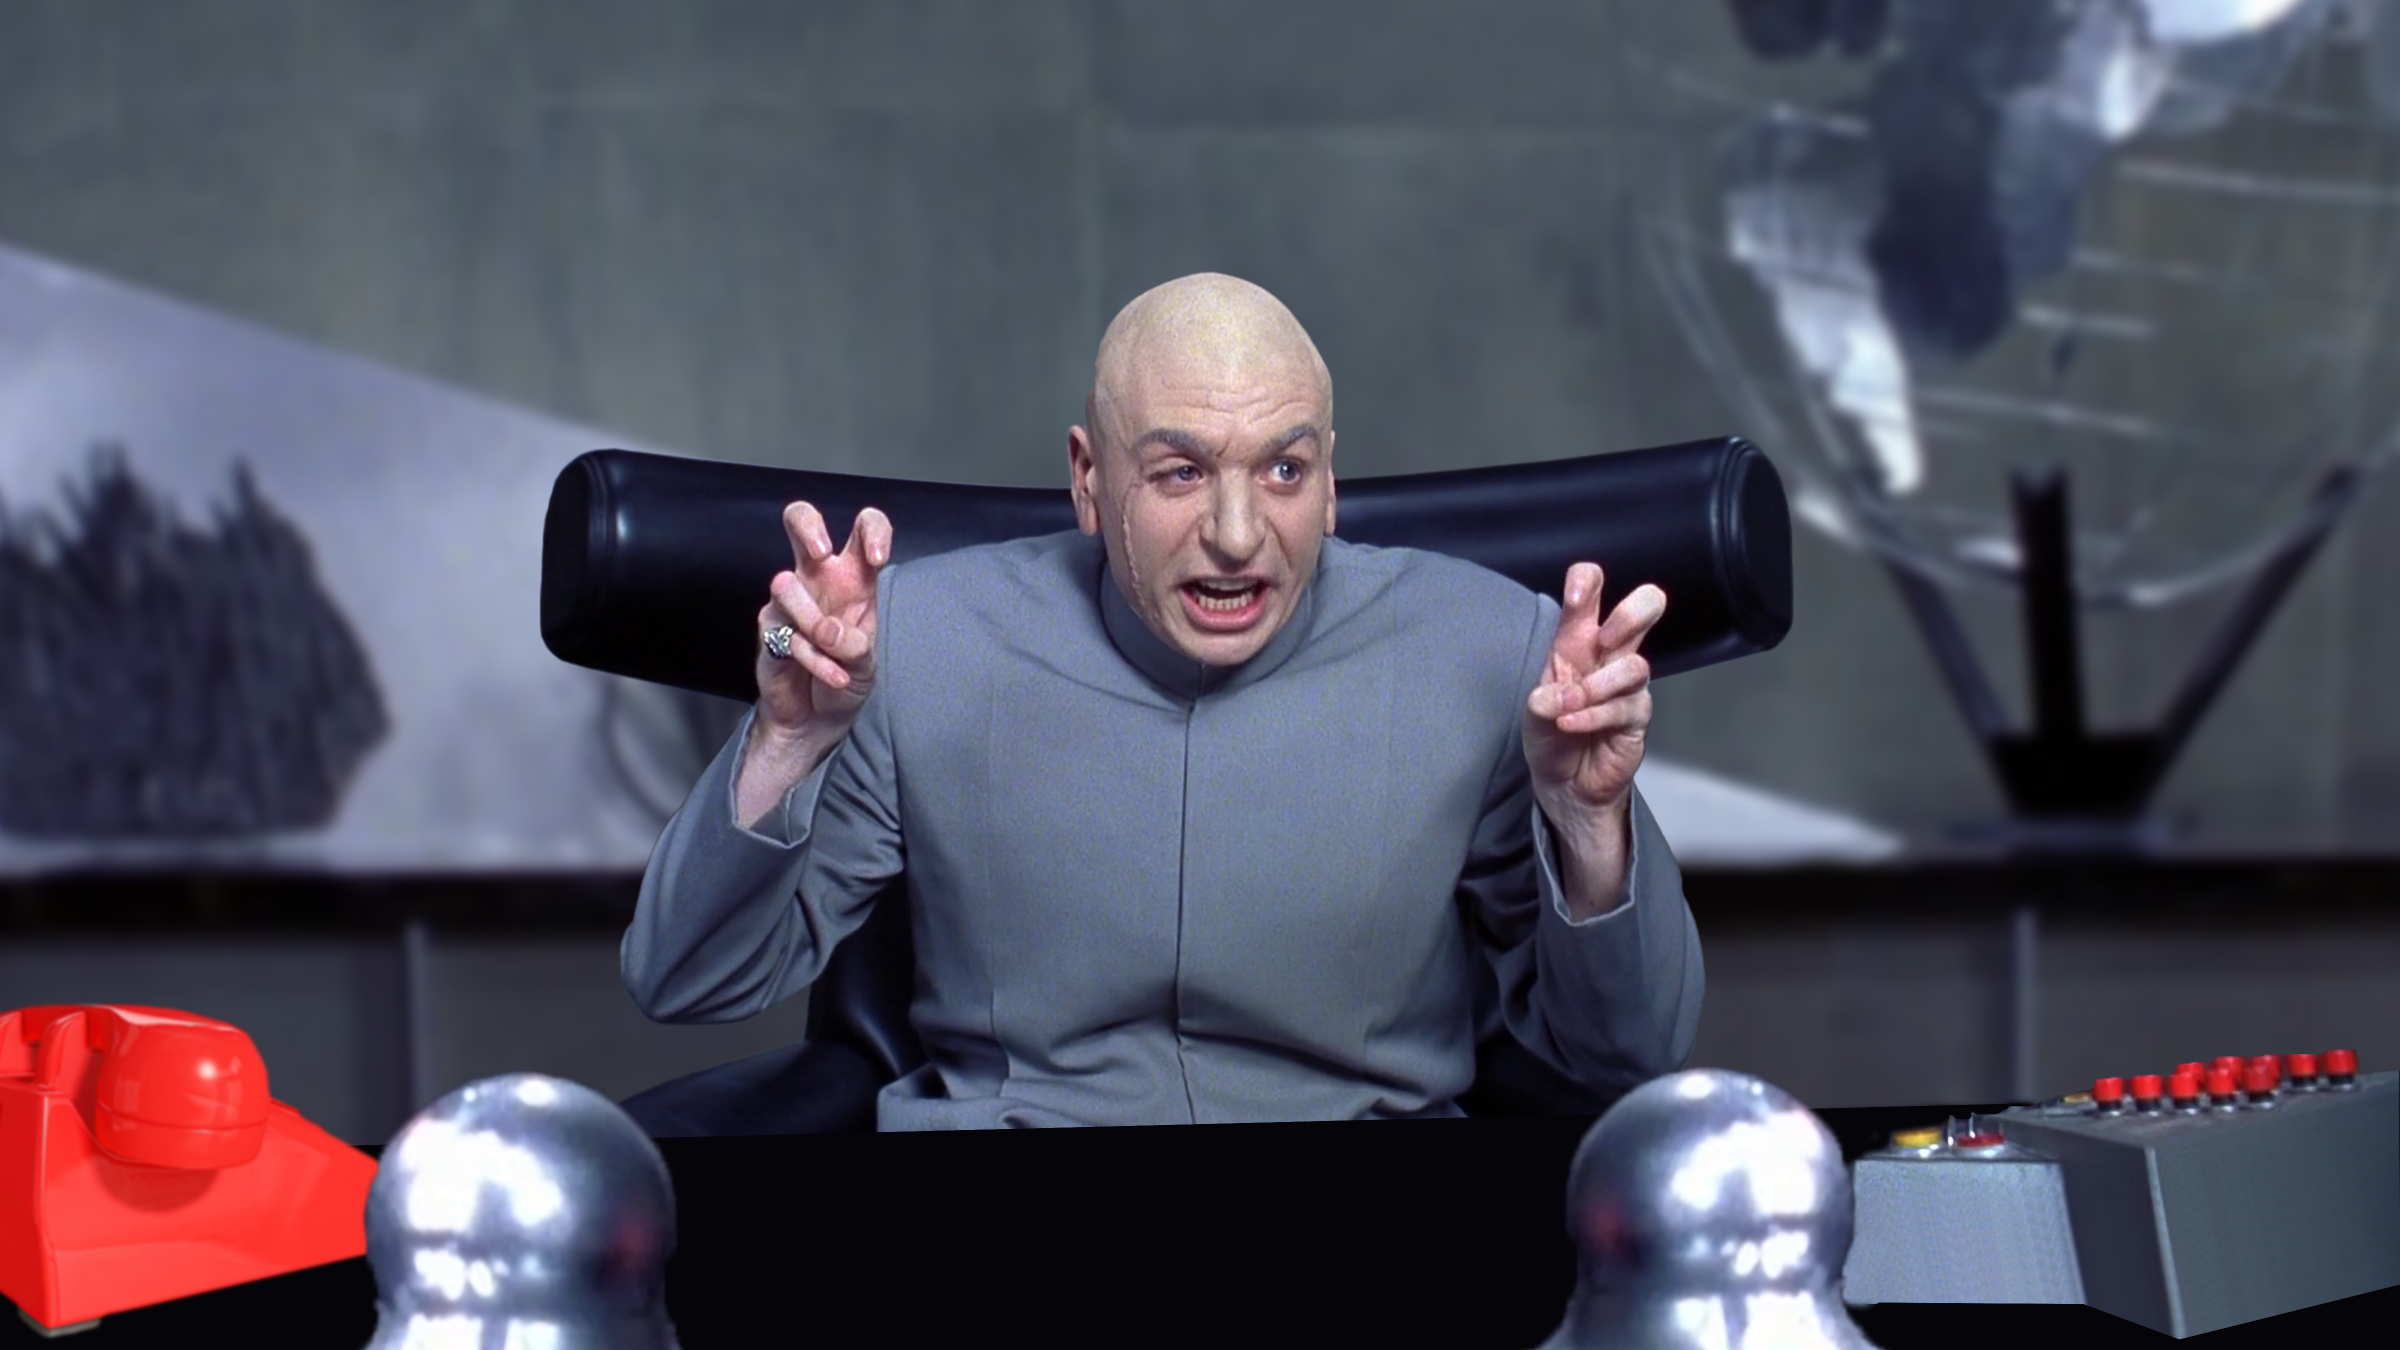 Dr Evil Air Quotes HD Widescreen Blank Meme Template